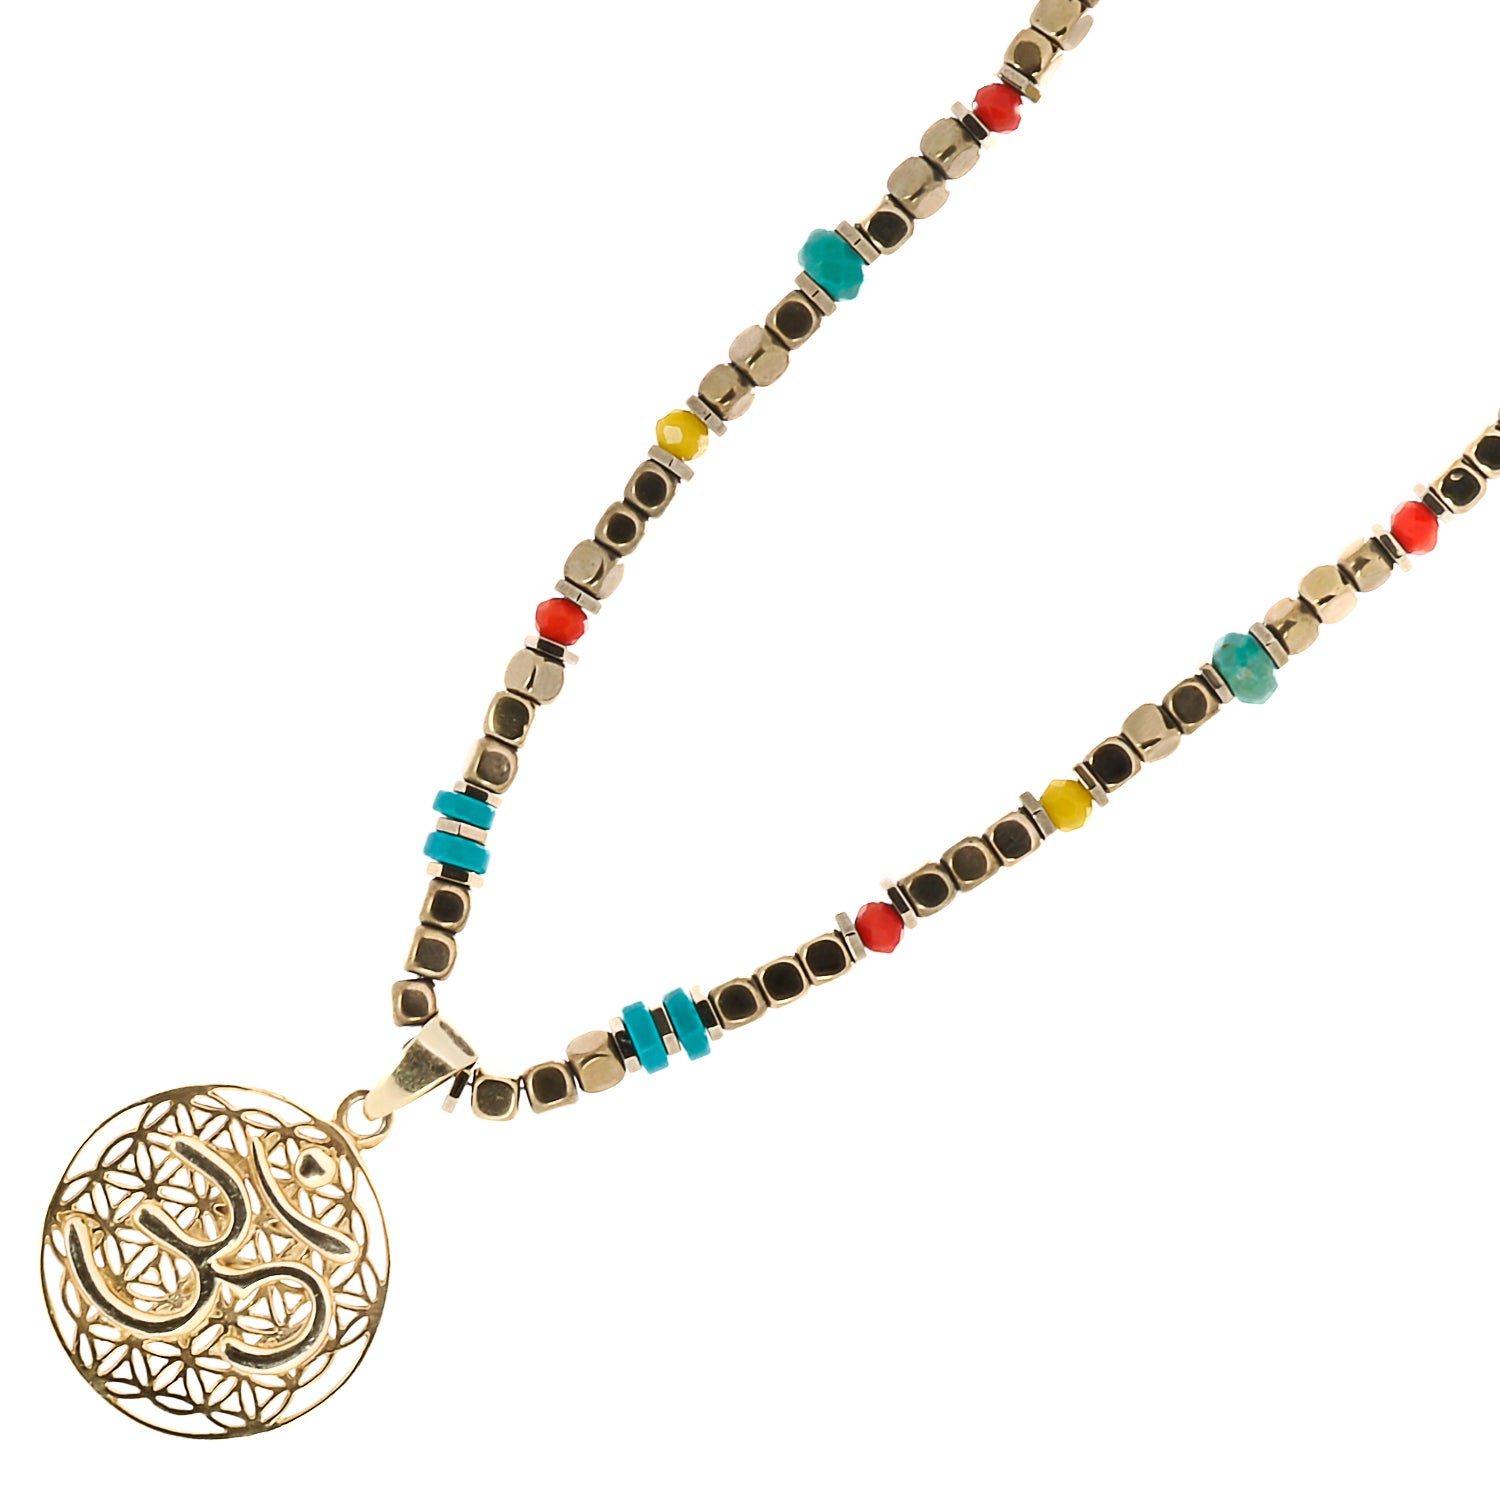 The Breathe Om Gold Necklace, designed as a choker, showcasing the luxurious 18K gold-plated Om pendant as its centerpiece.